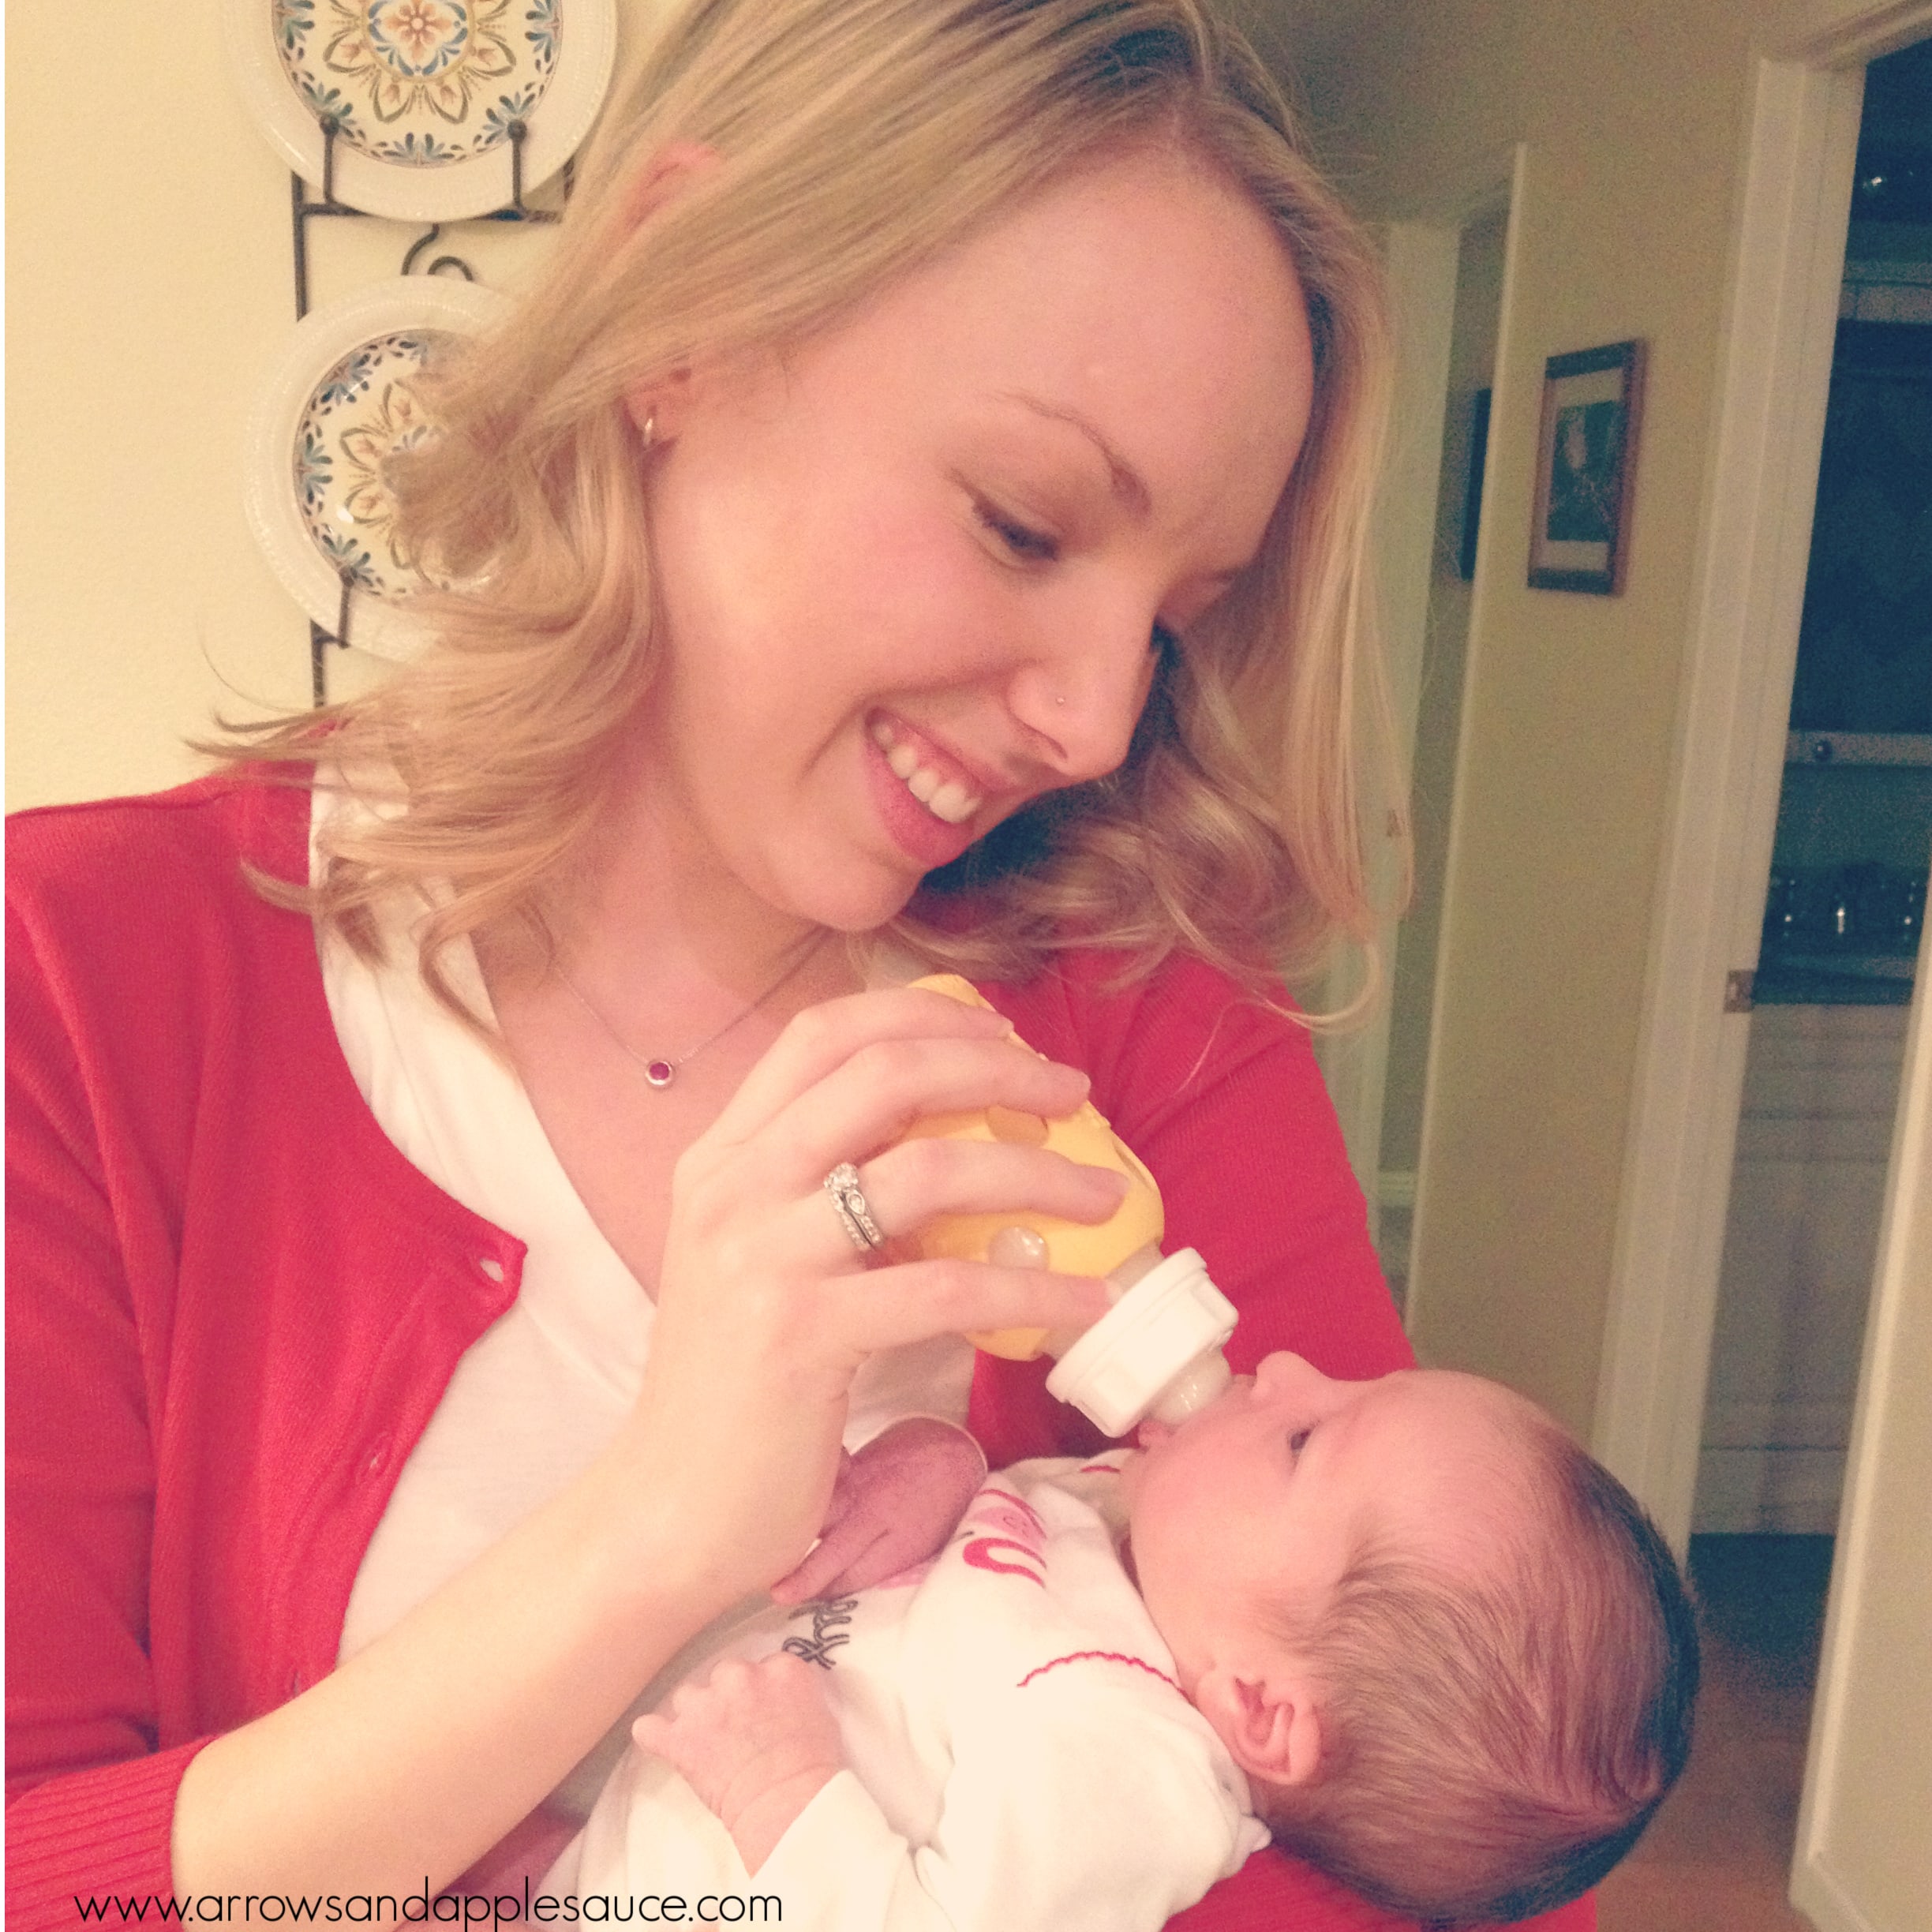 How I fed my adopted daughter with breast milk donation and tips for finding breast milk donors. We were able to feed her breast milk exclusively for 10 months! #breastmilkdonation #milksharing #liquidgold #adoptiveparents #adoptivemom #fedisbest